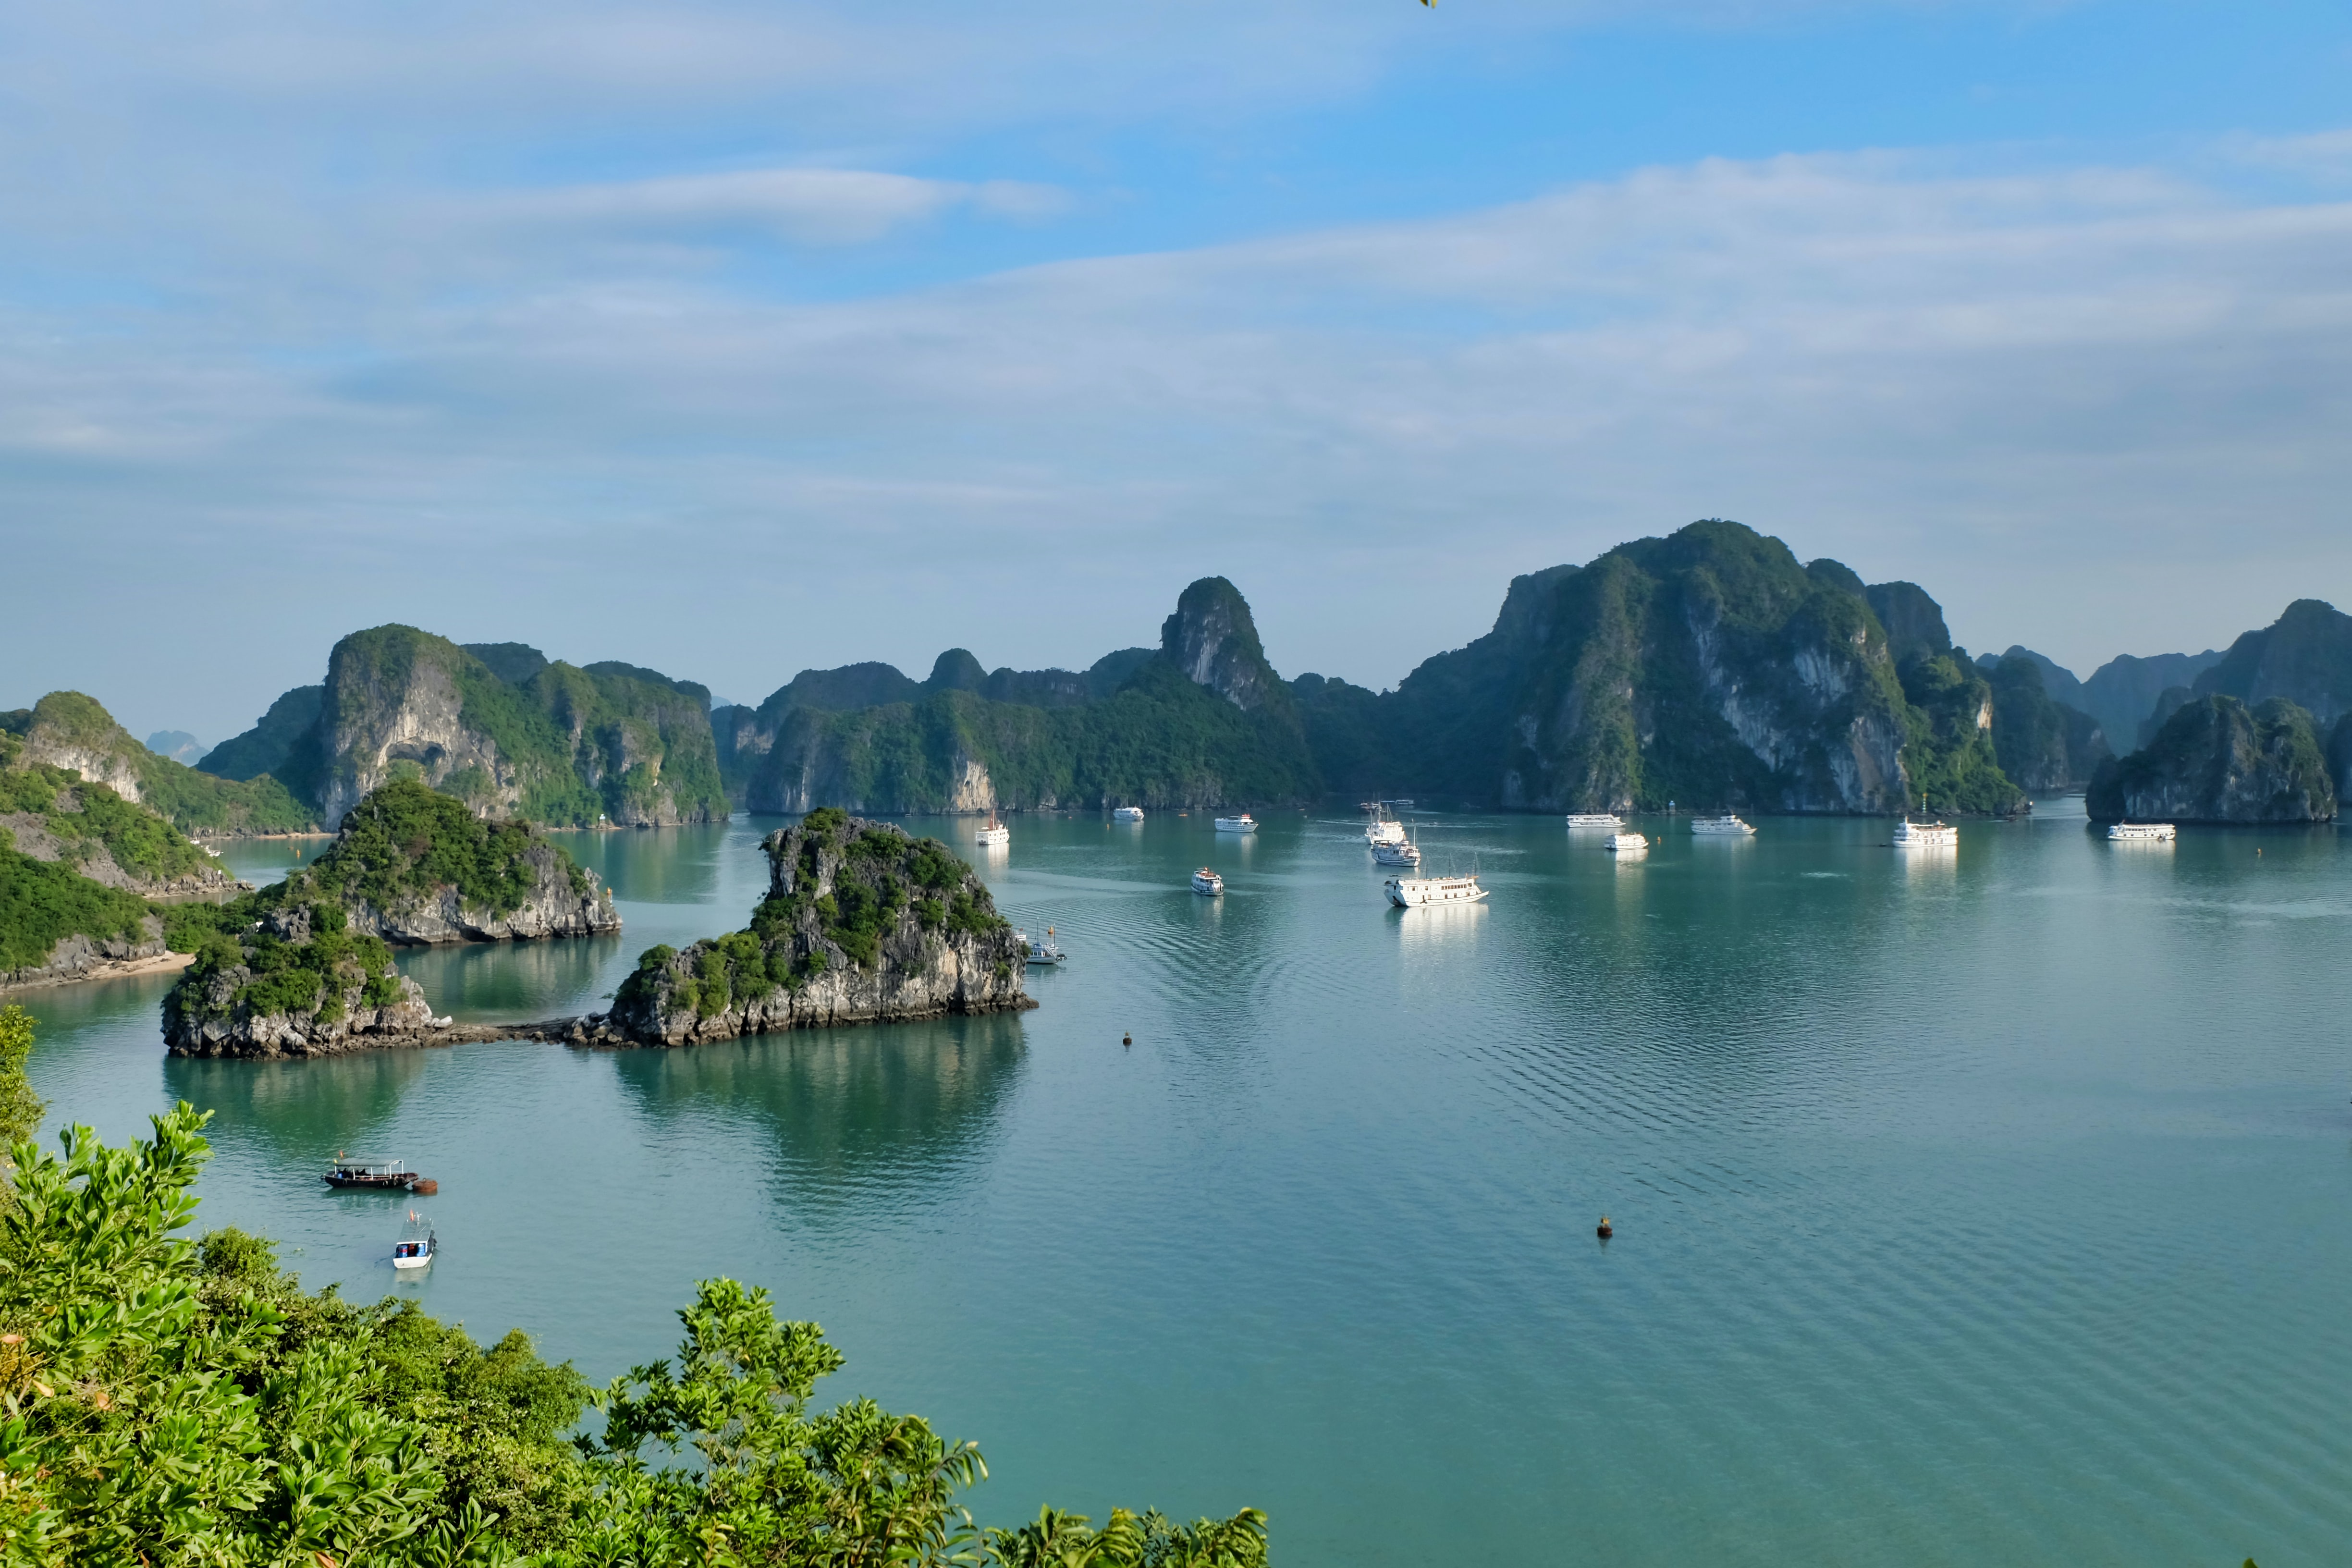 10 Best Things to do in Halong Bay, Vietnam [with Suggested Tours]